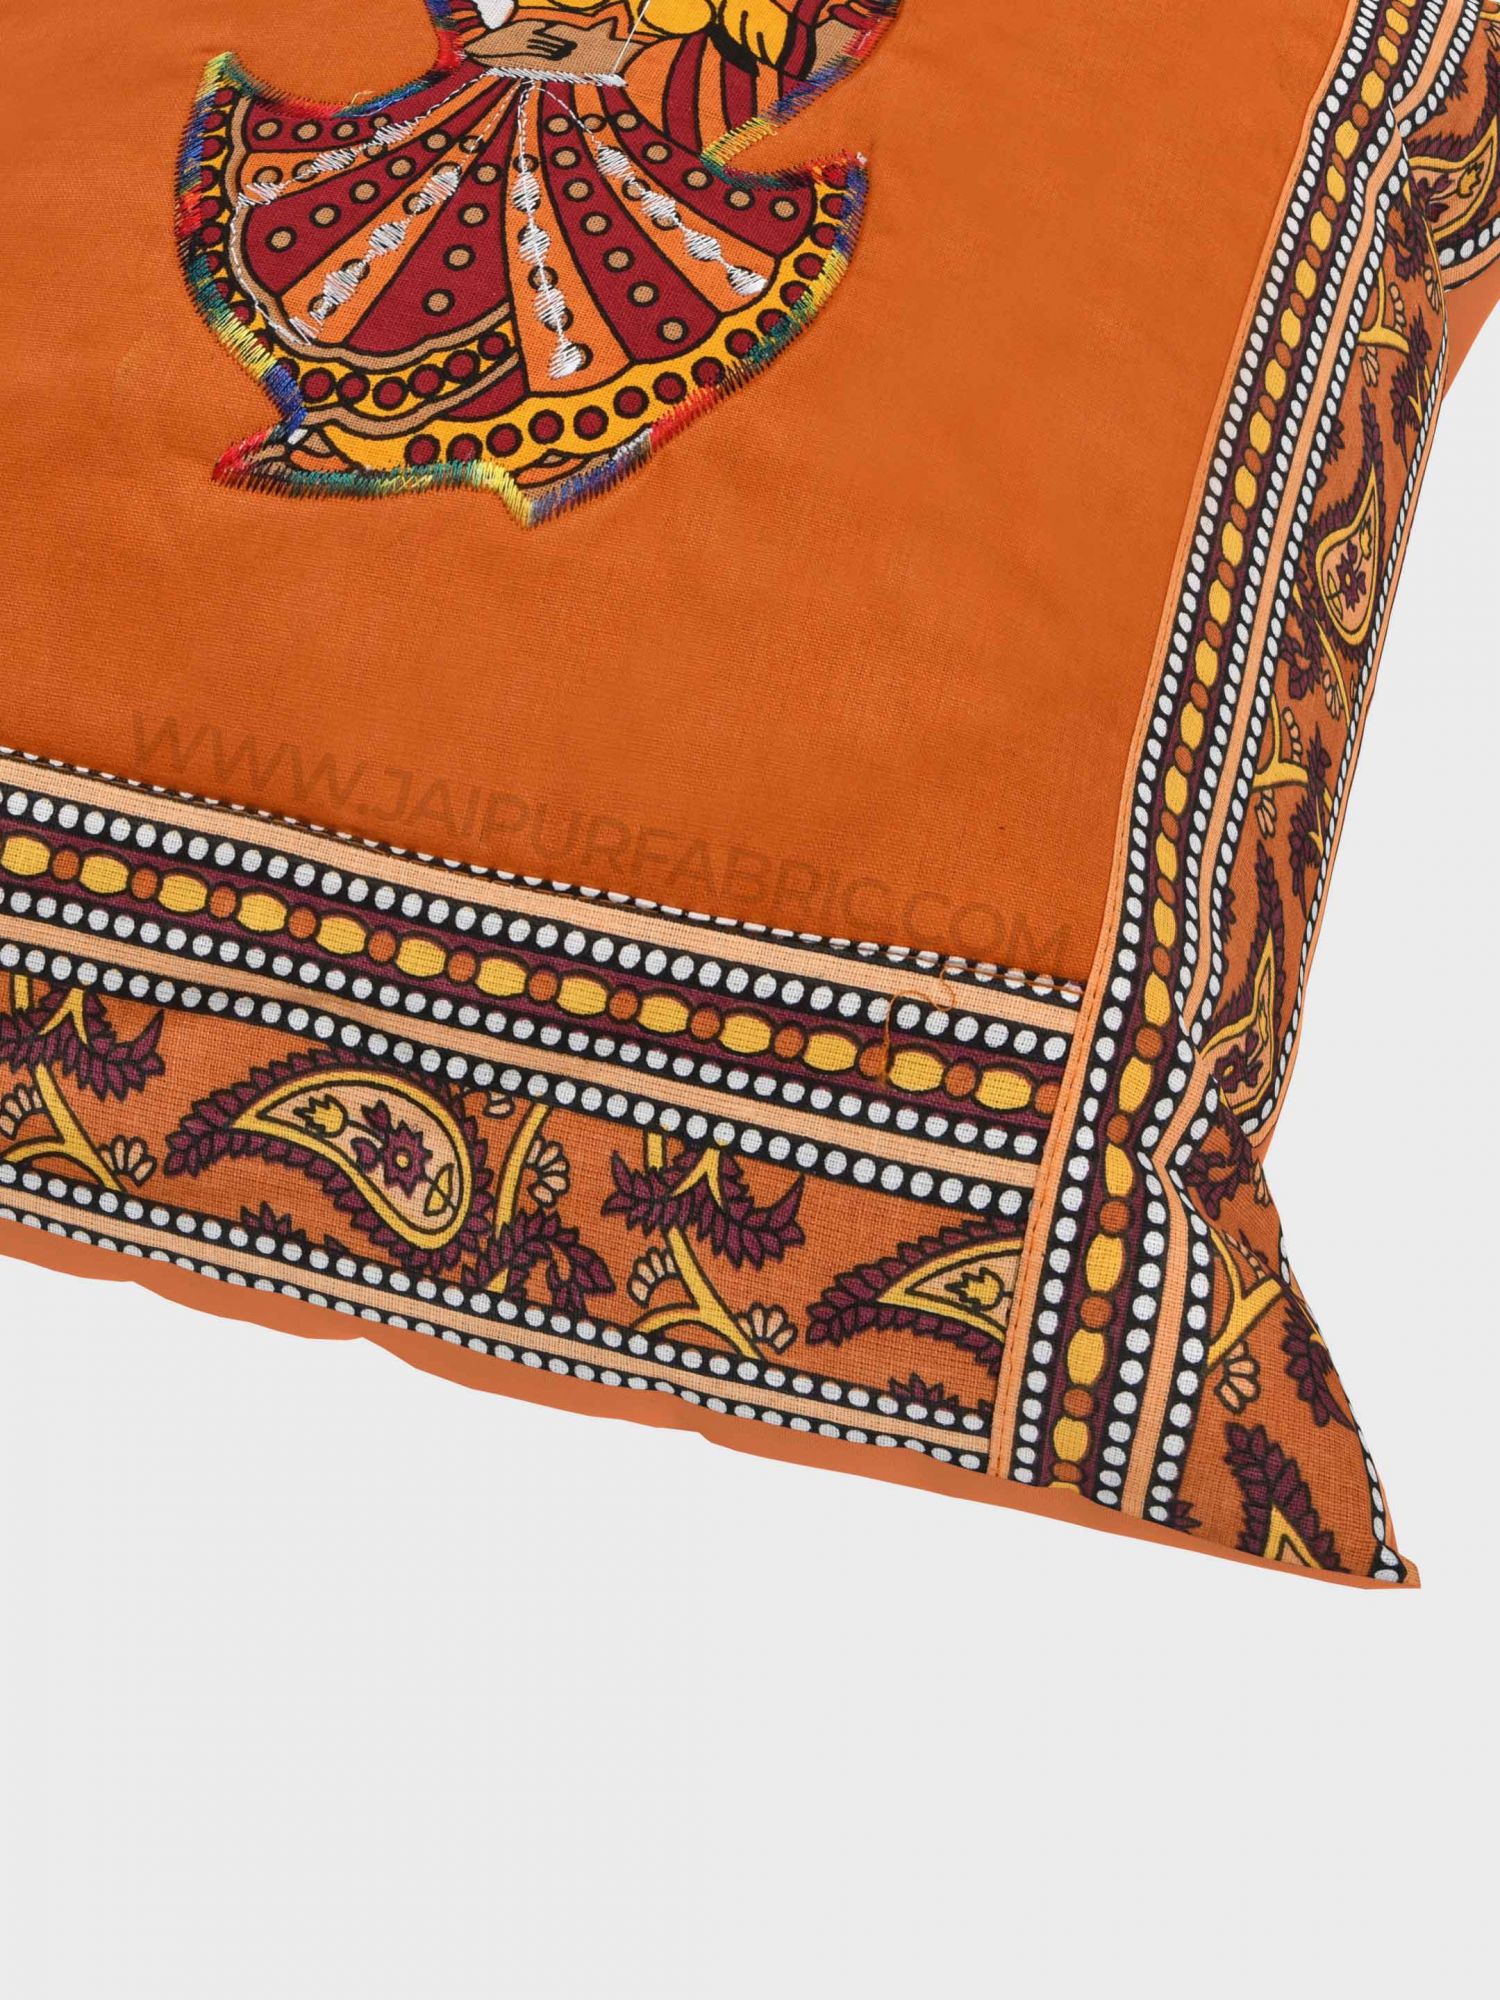 Applique Mustard Rajasthani Dance Jaipuri Hand Made Embroidery Patch Work Cushion Cover